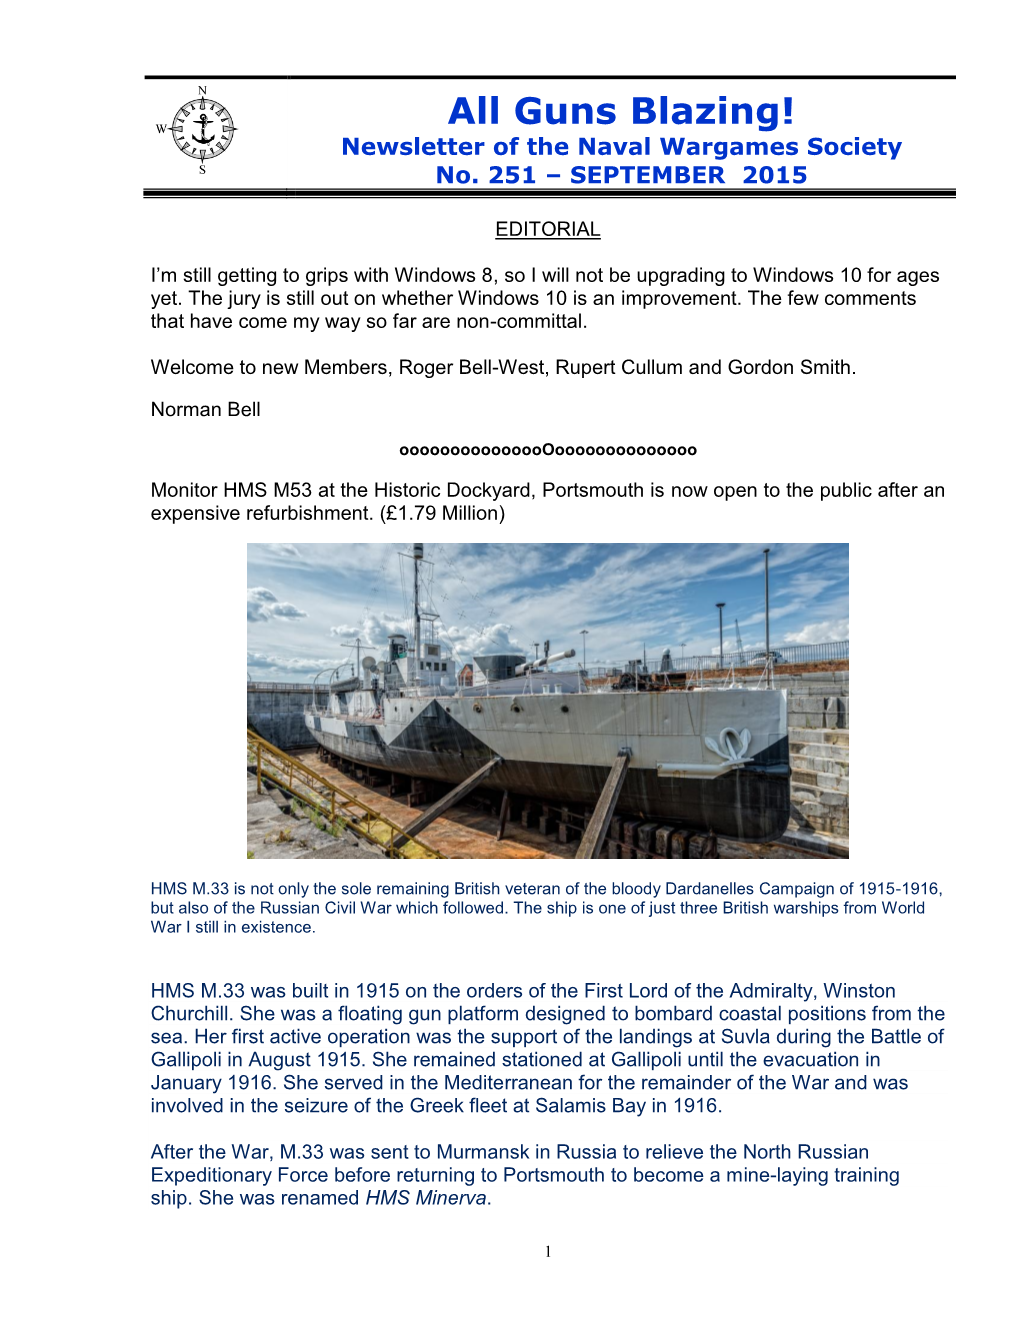 All Guns Blazing! Newsletter of the Naval Wargames Society No